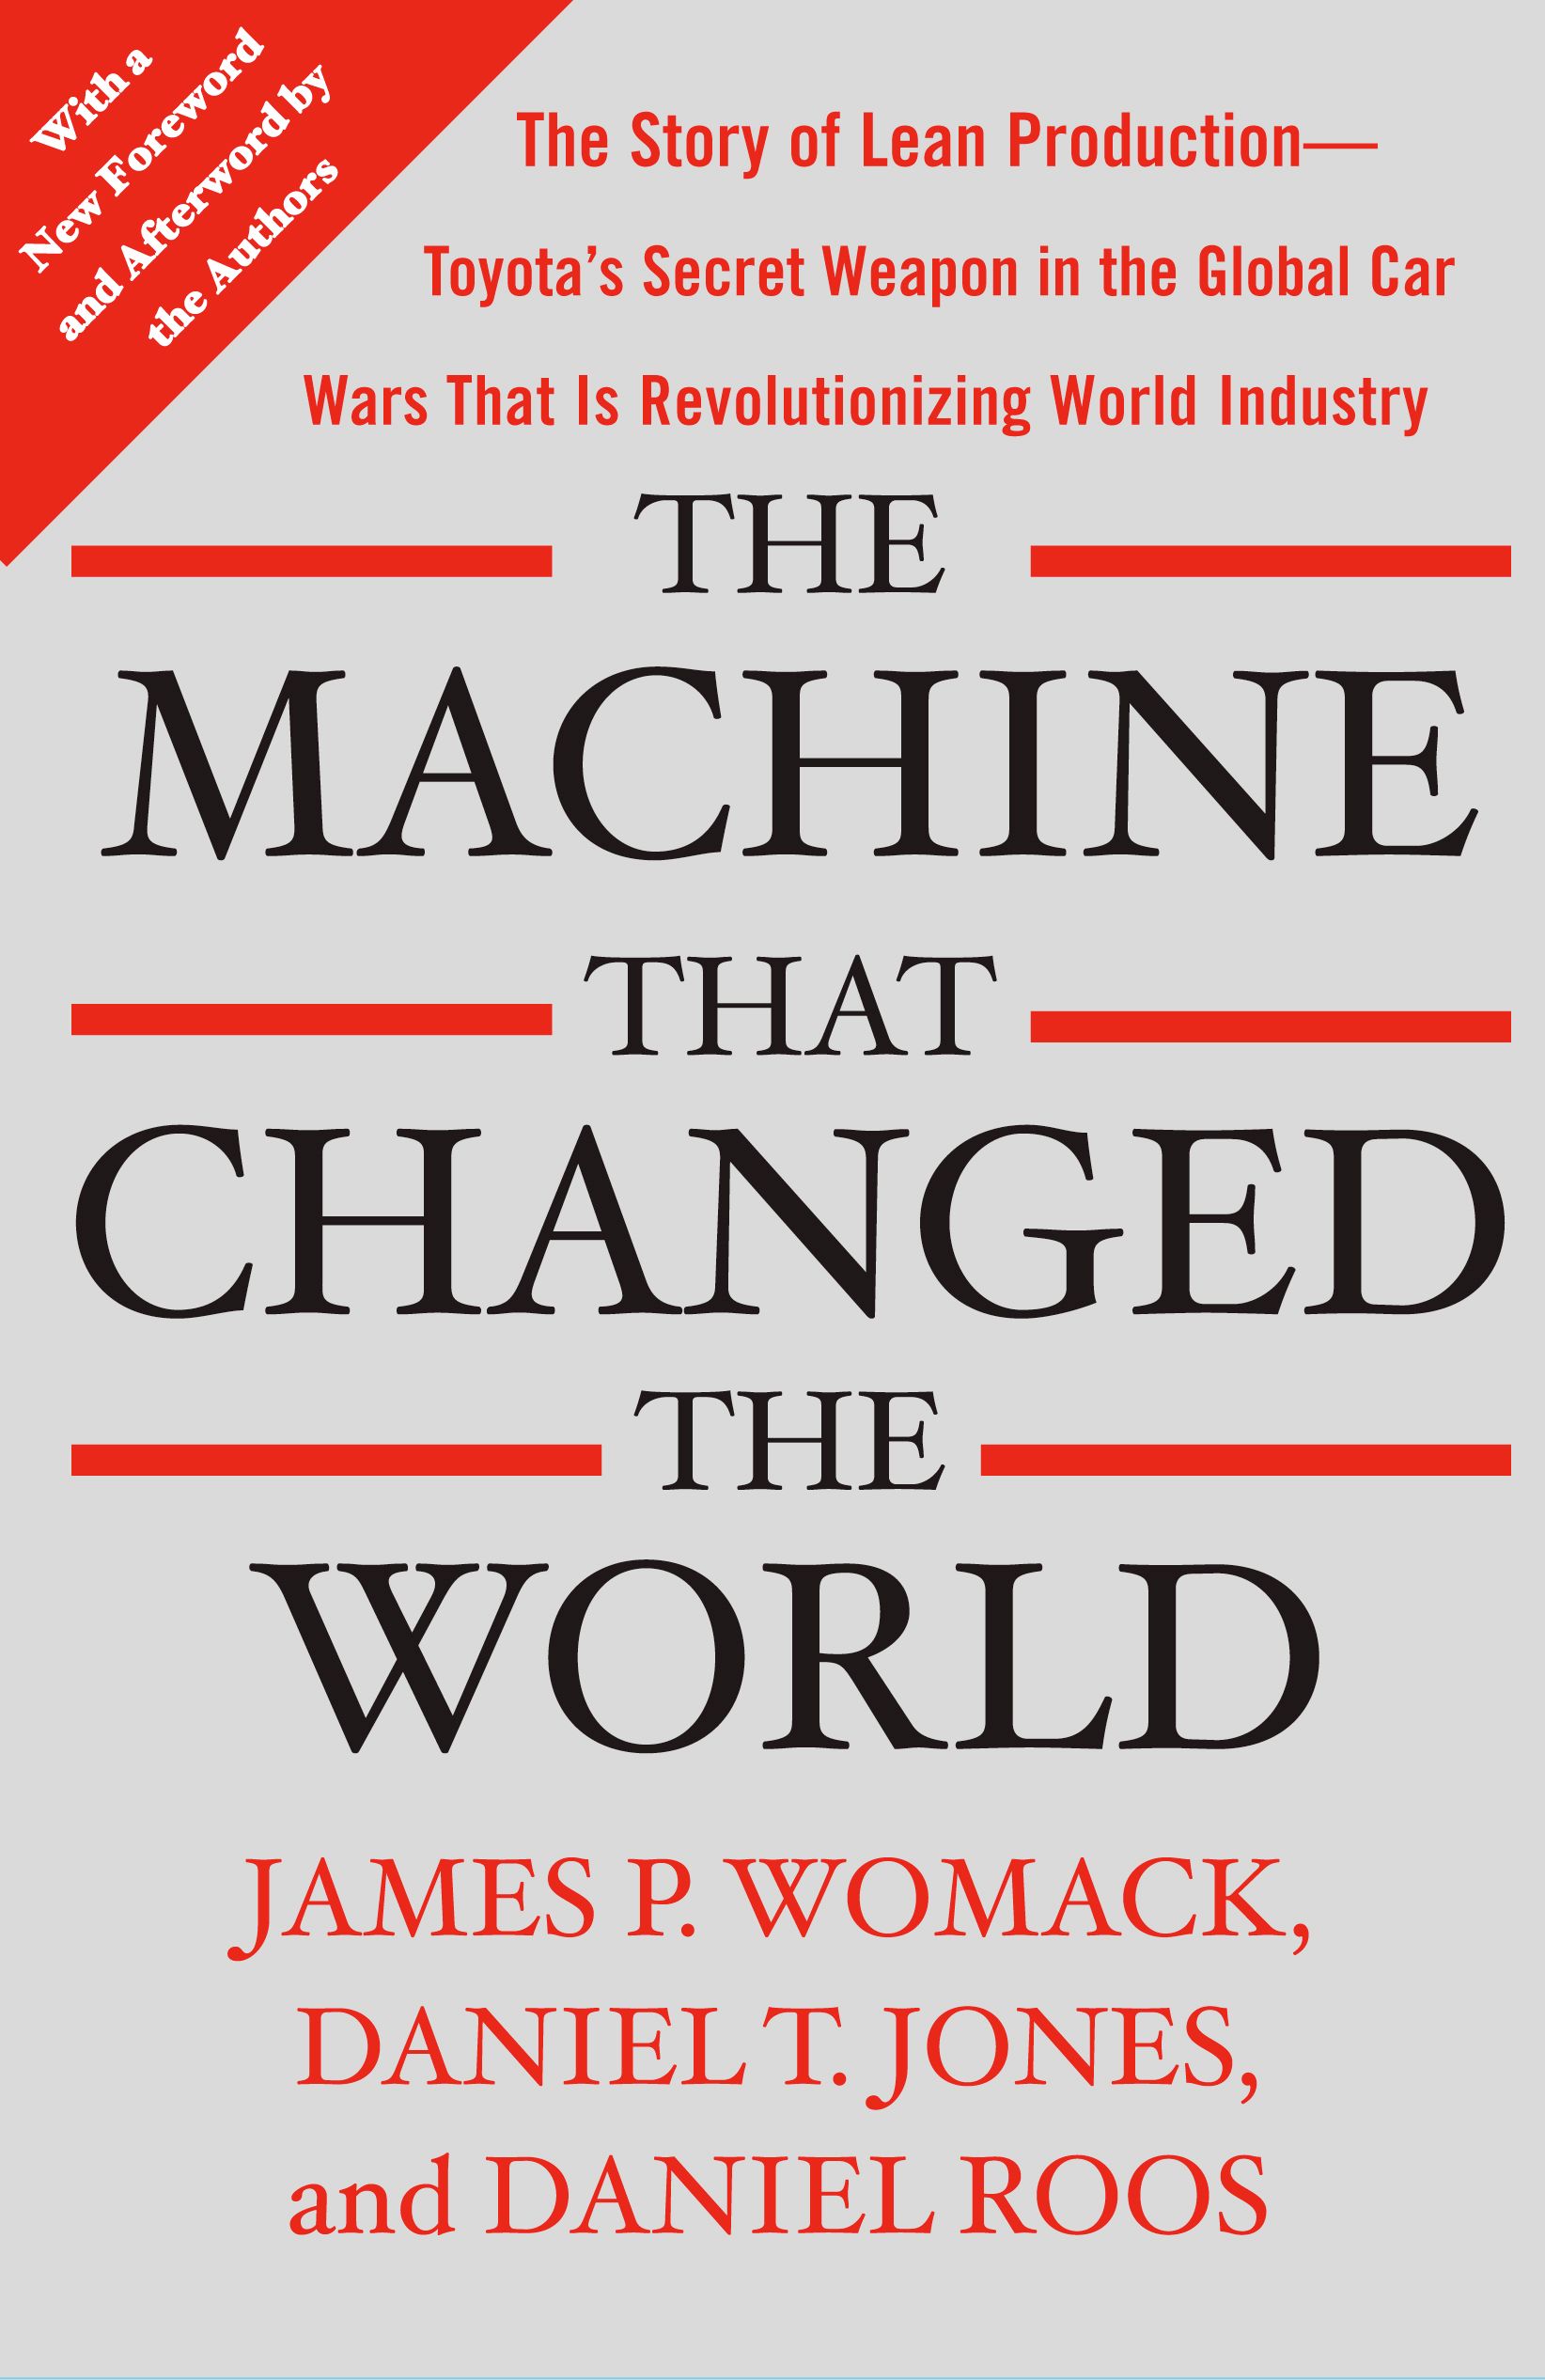 The book cover of "The Machine That Changed the World."